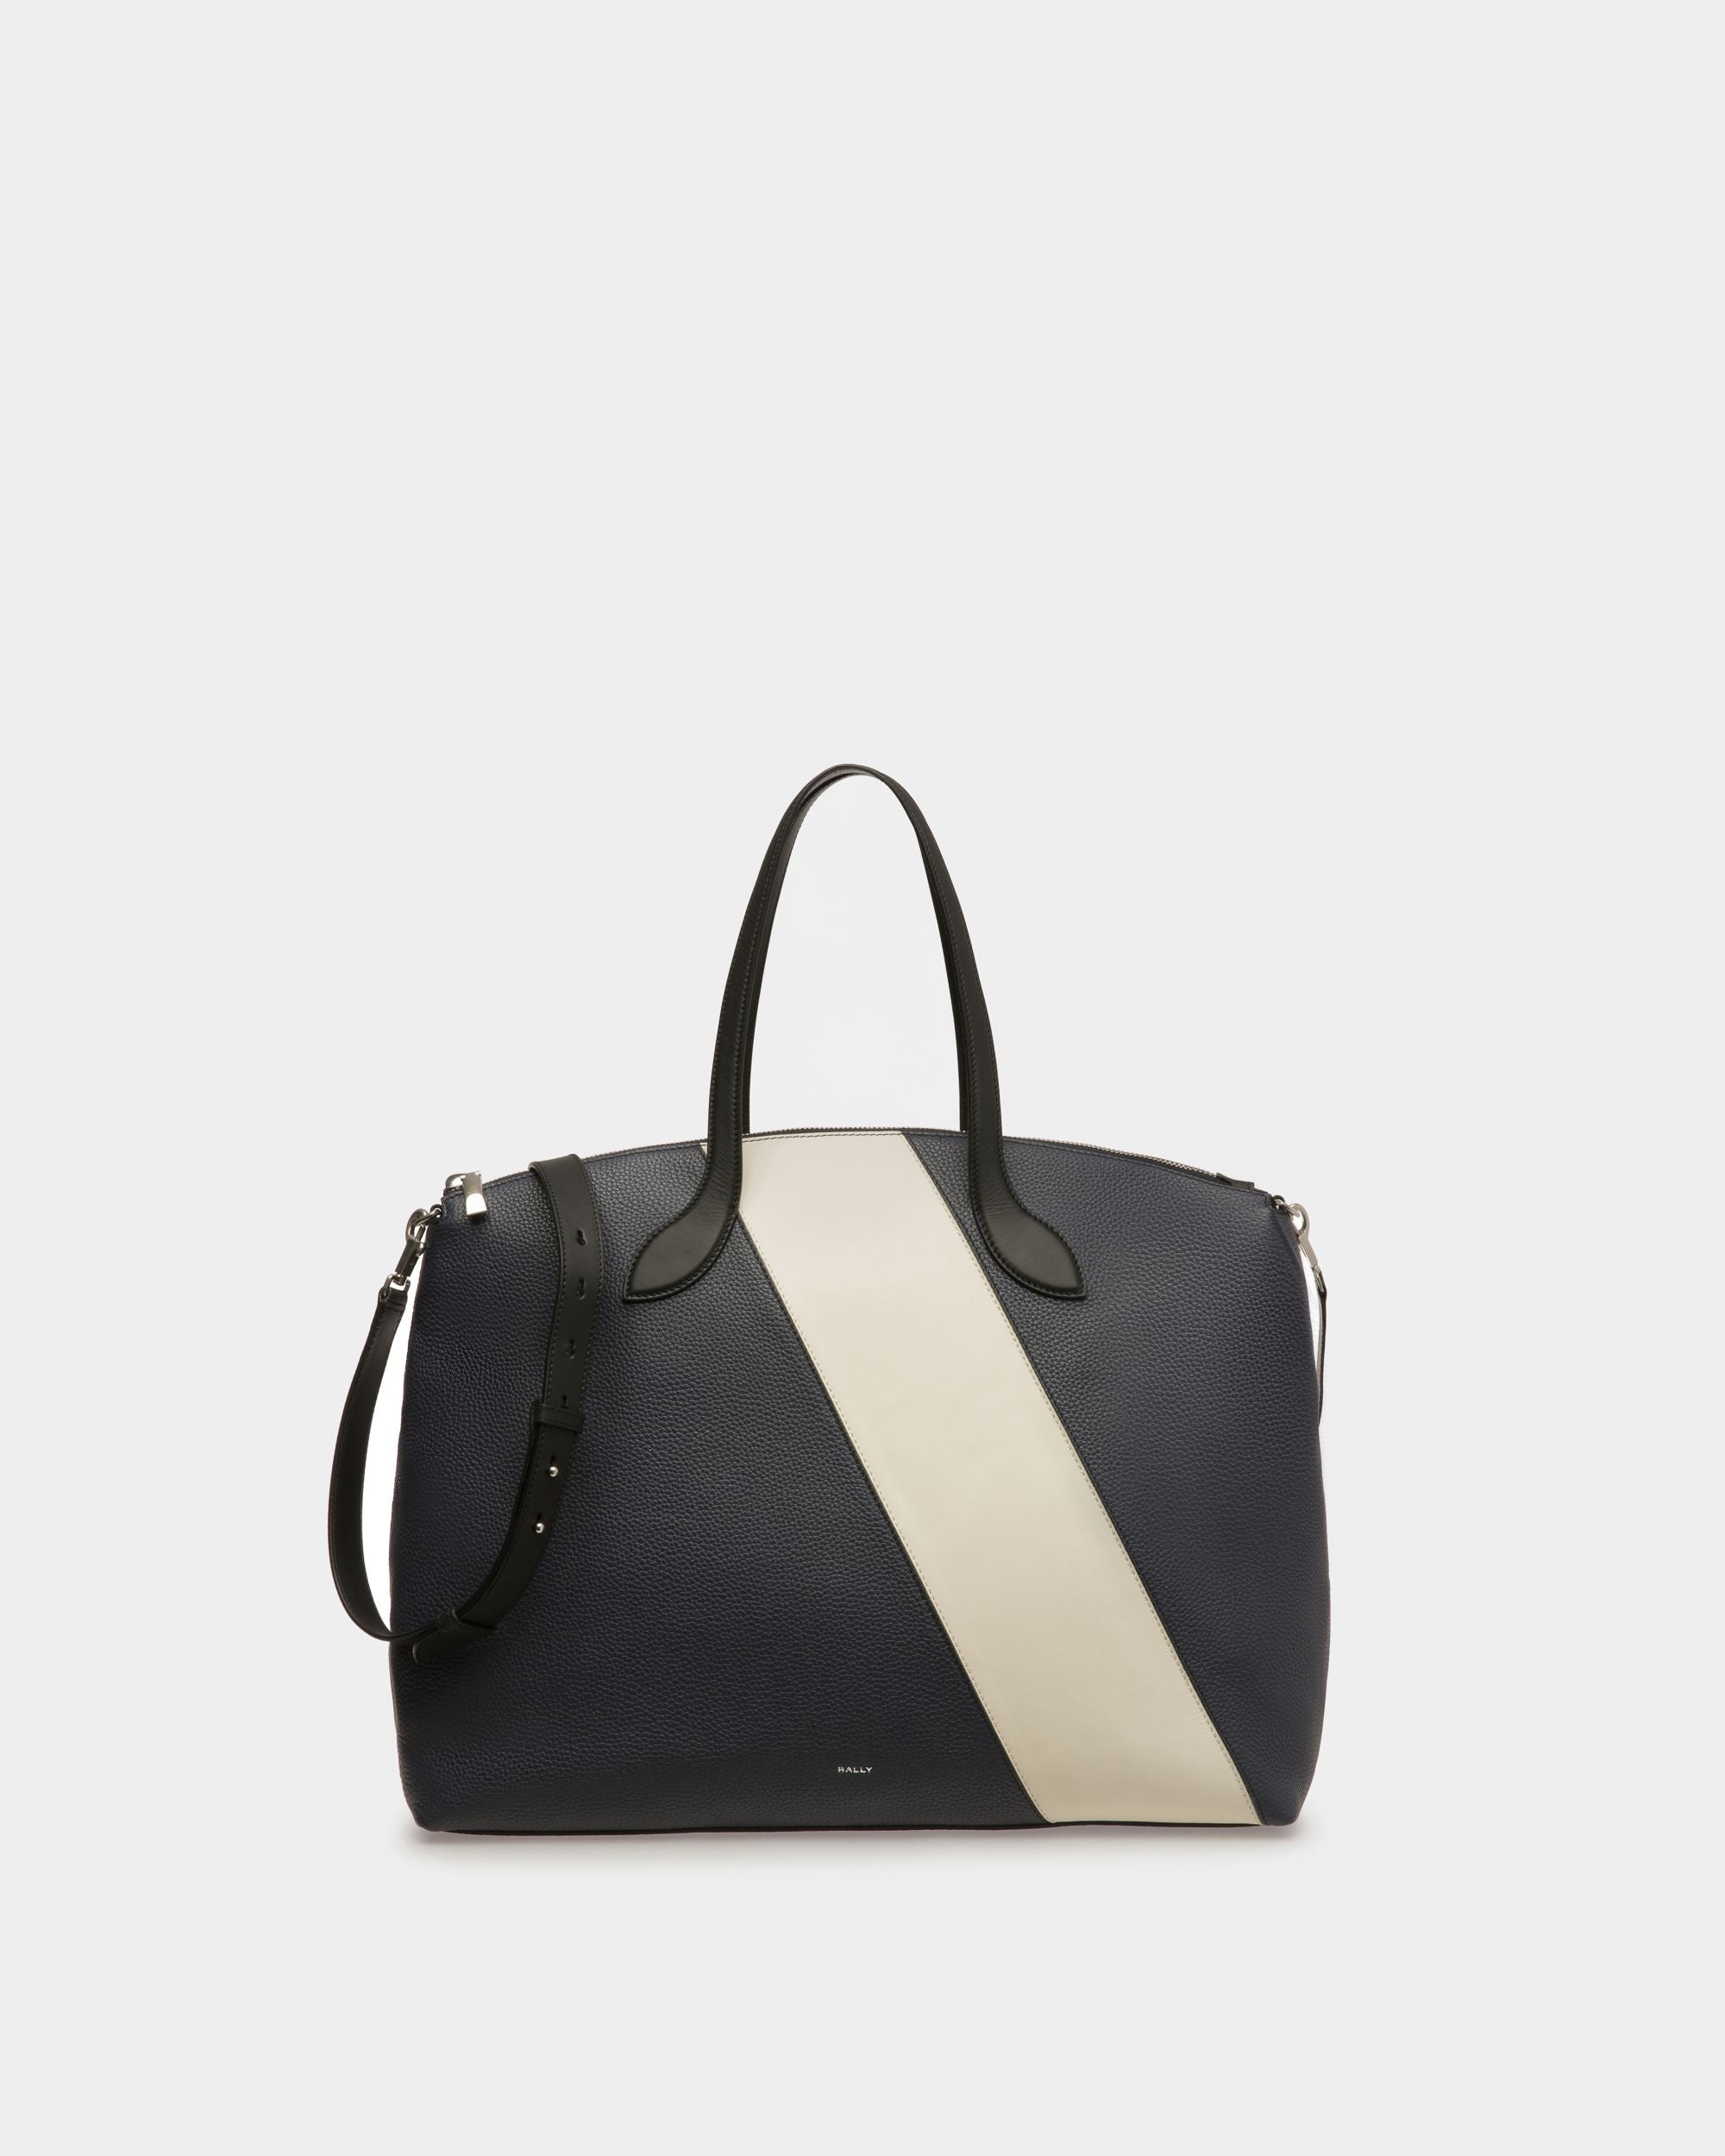 Shaped | Men's Tote Bag | Midnight Leather | Bally | Still Life Front